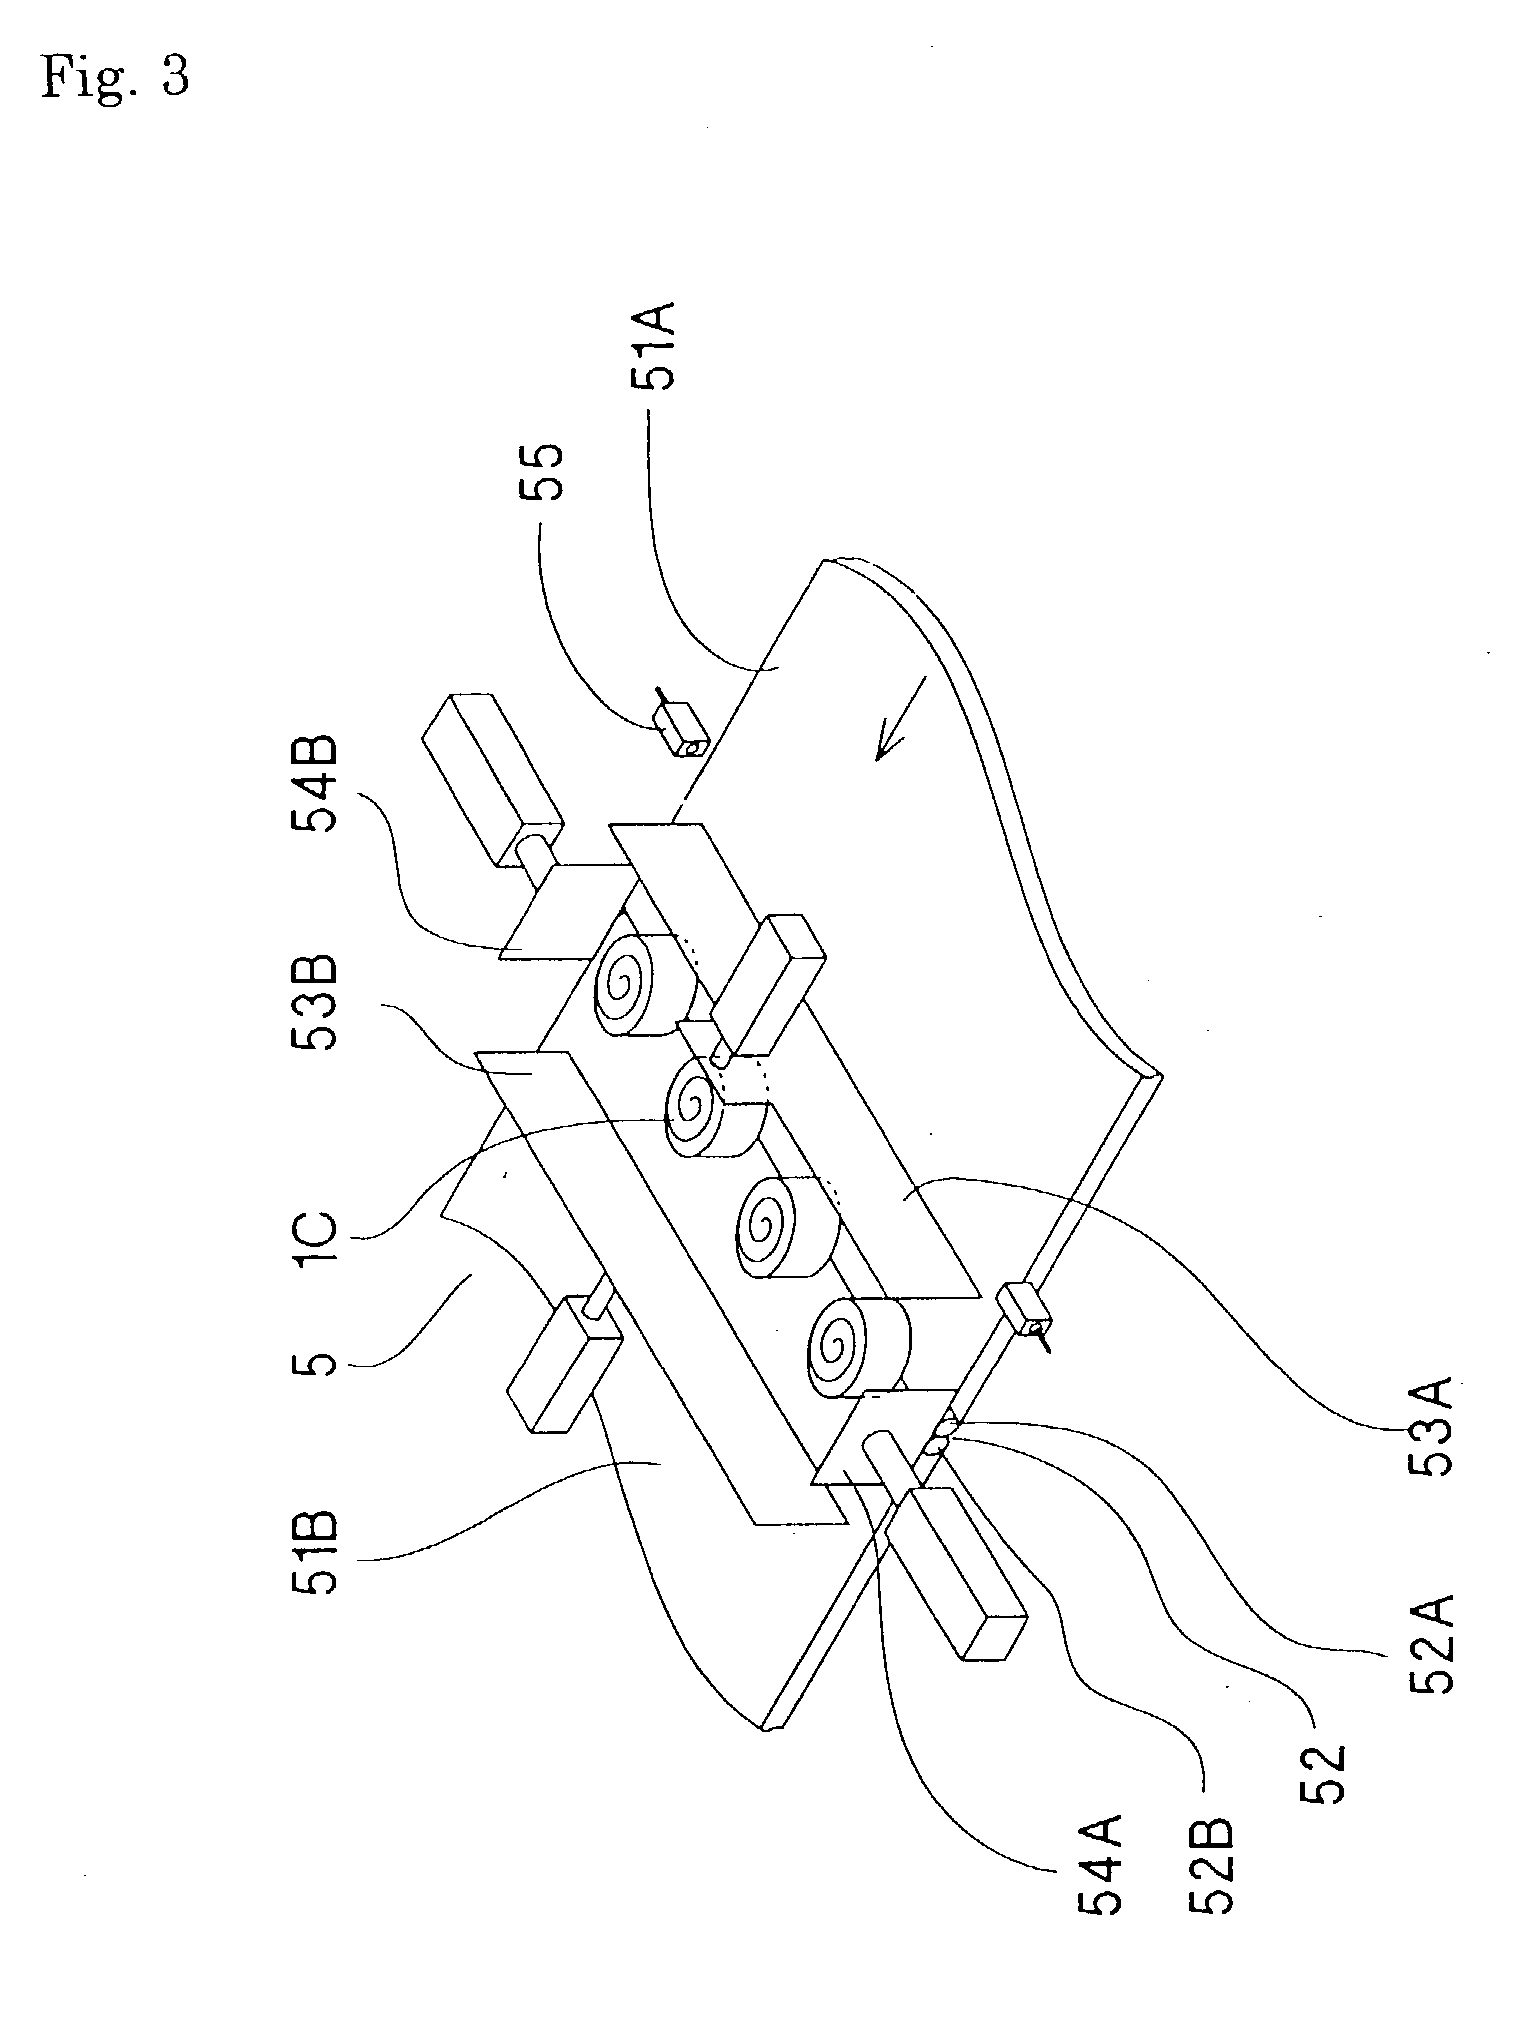 Apparatus and method for manufacturing bread